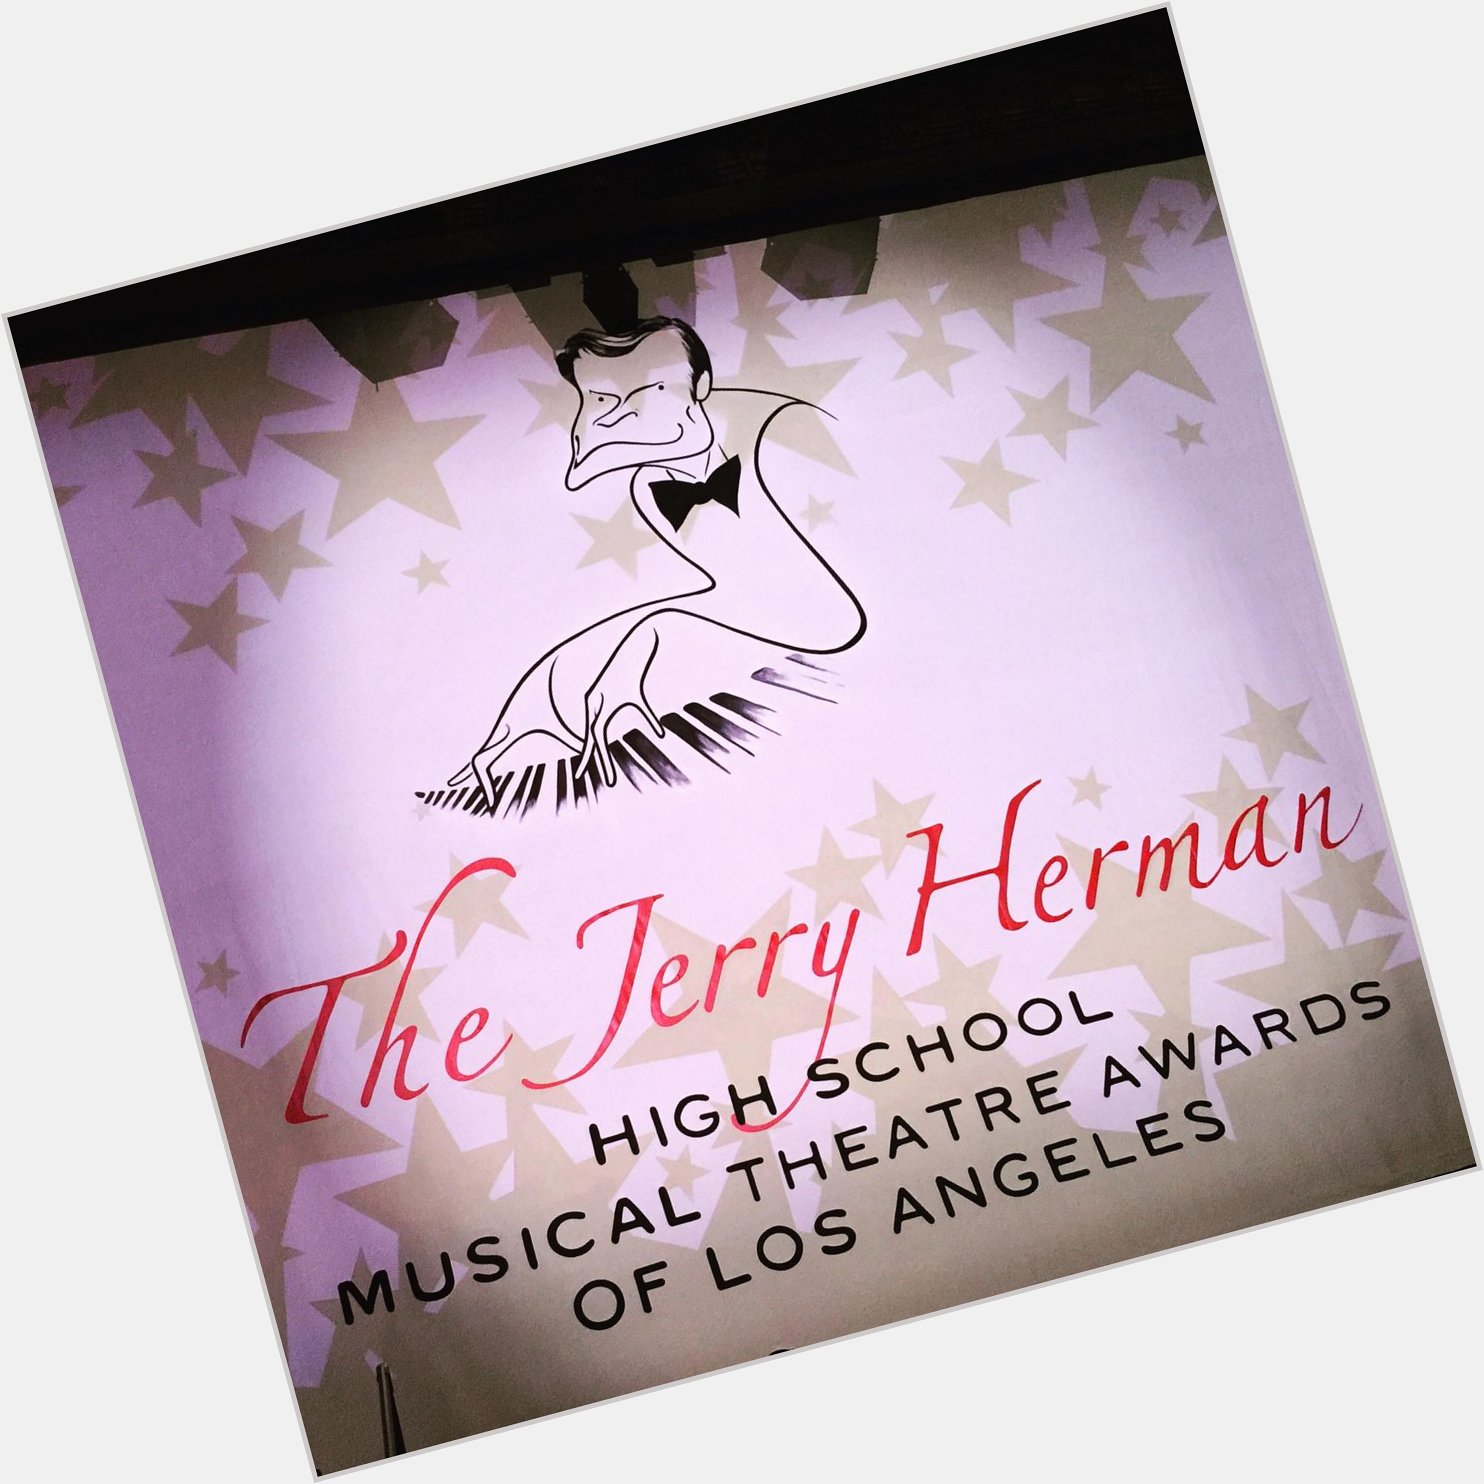 Best wishes for a very happy birthday to the legendary Jerry Herman!   